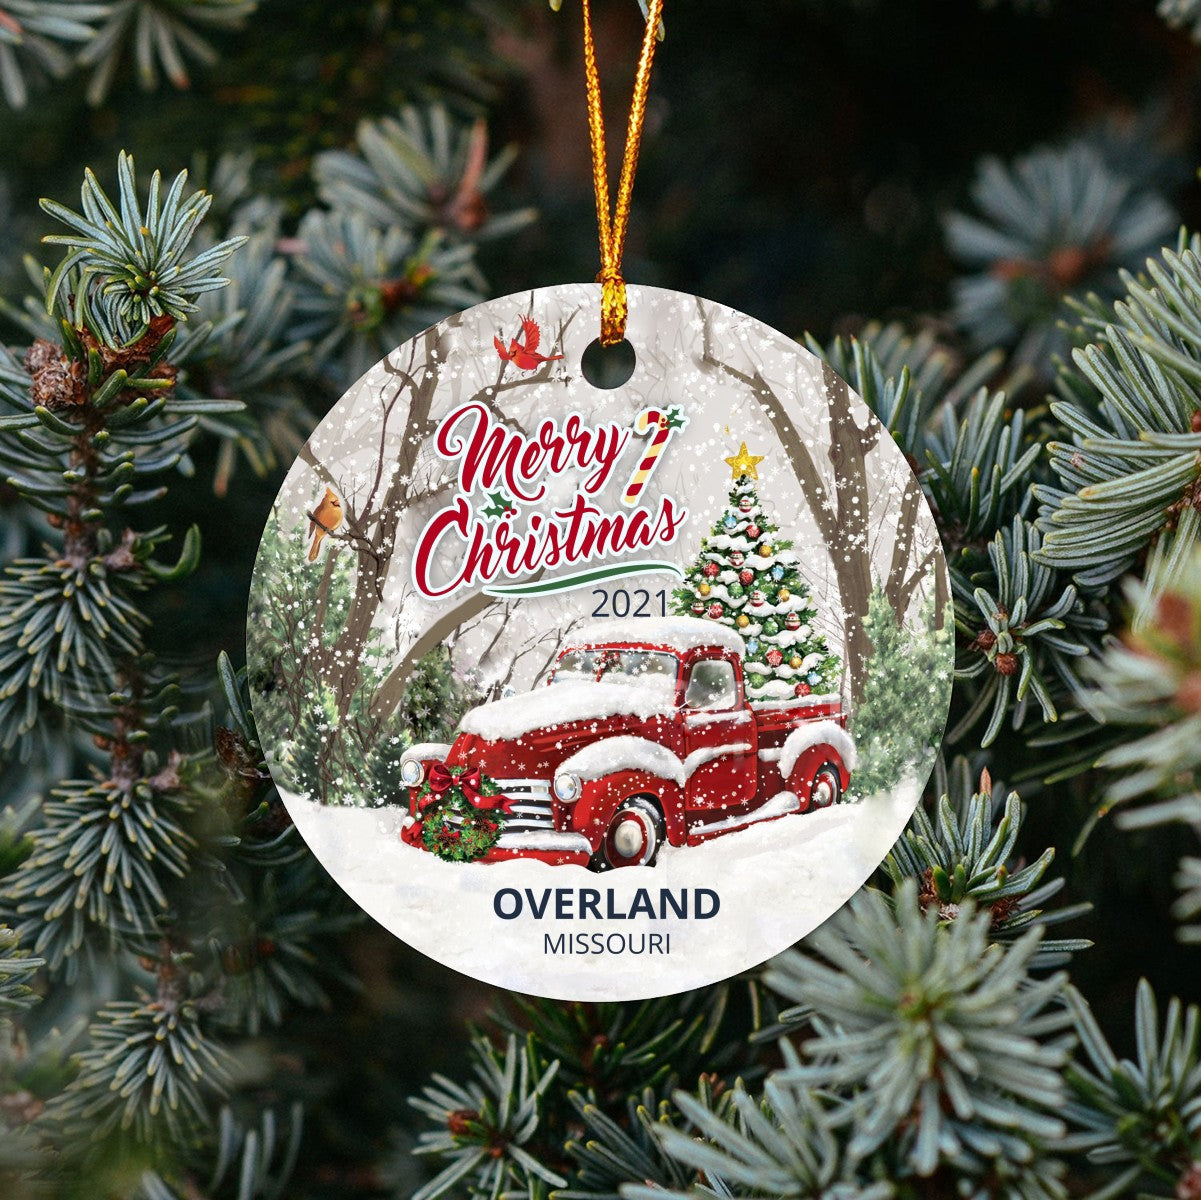 Christmas Tree Ornaments Overland - Ornament With Name City, State Overland Missouri MO Ornament - Red Truck Xmas Ornaments 3'' Plastic Gift For Family, Friend And Housewarming